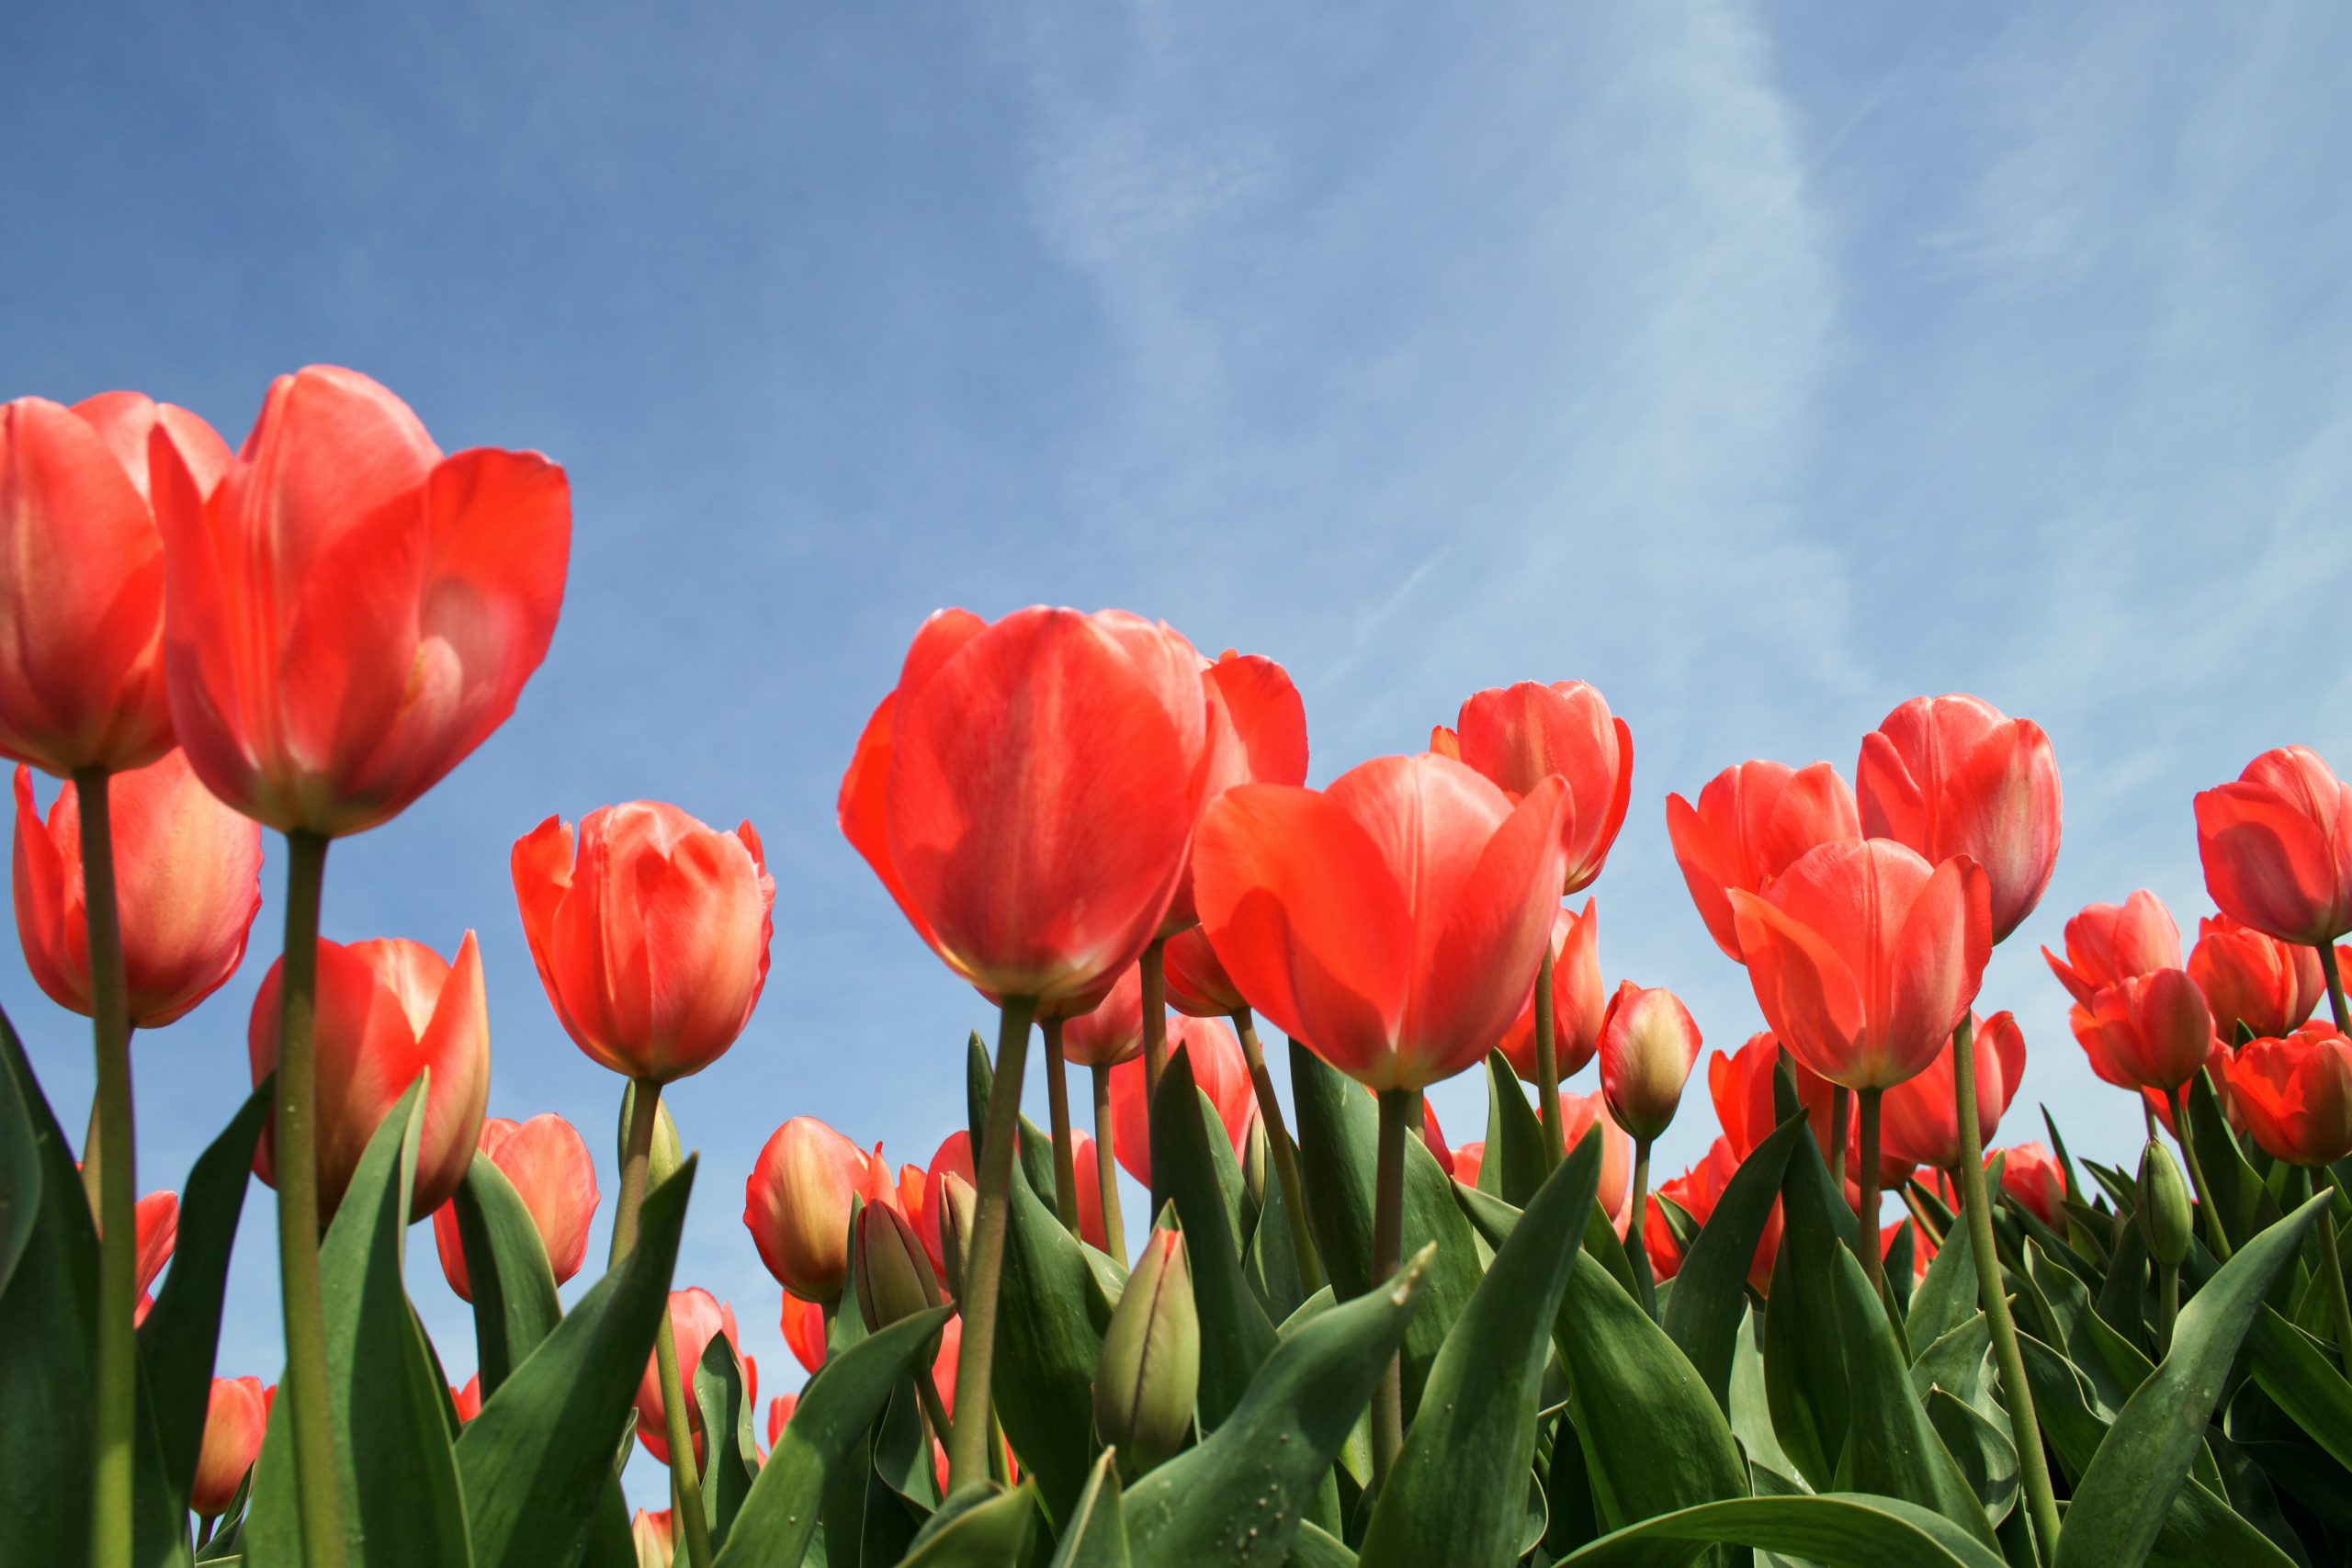 TULIP – The Five Points of Calvinism